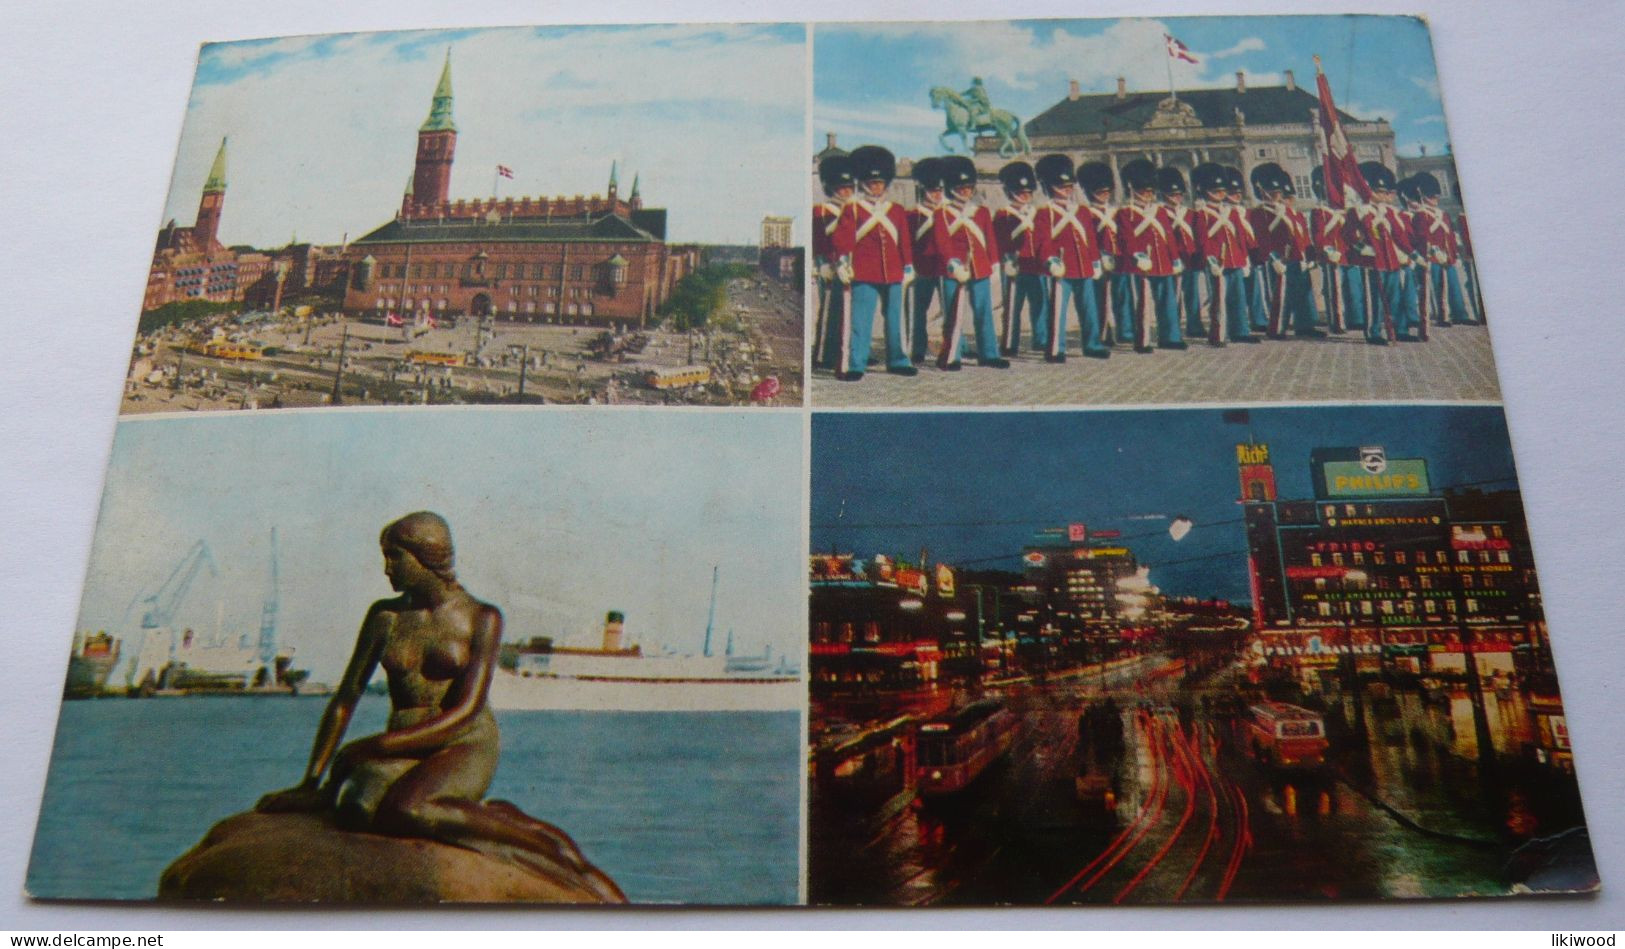 Copenhagen, København  - The City Hall Square By Day And Night, The Little Mermaid, The Royal Guard - Denemarken